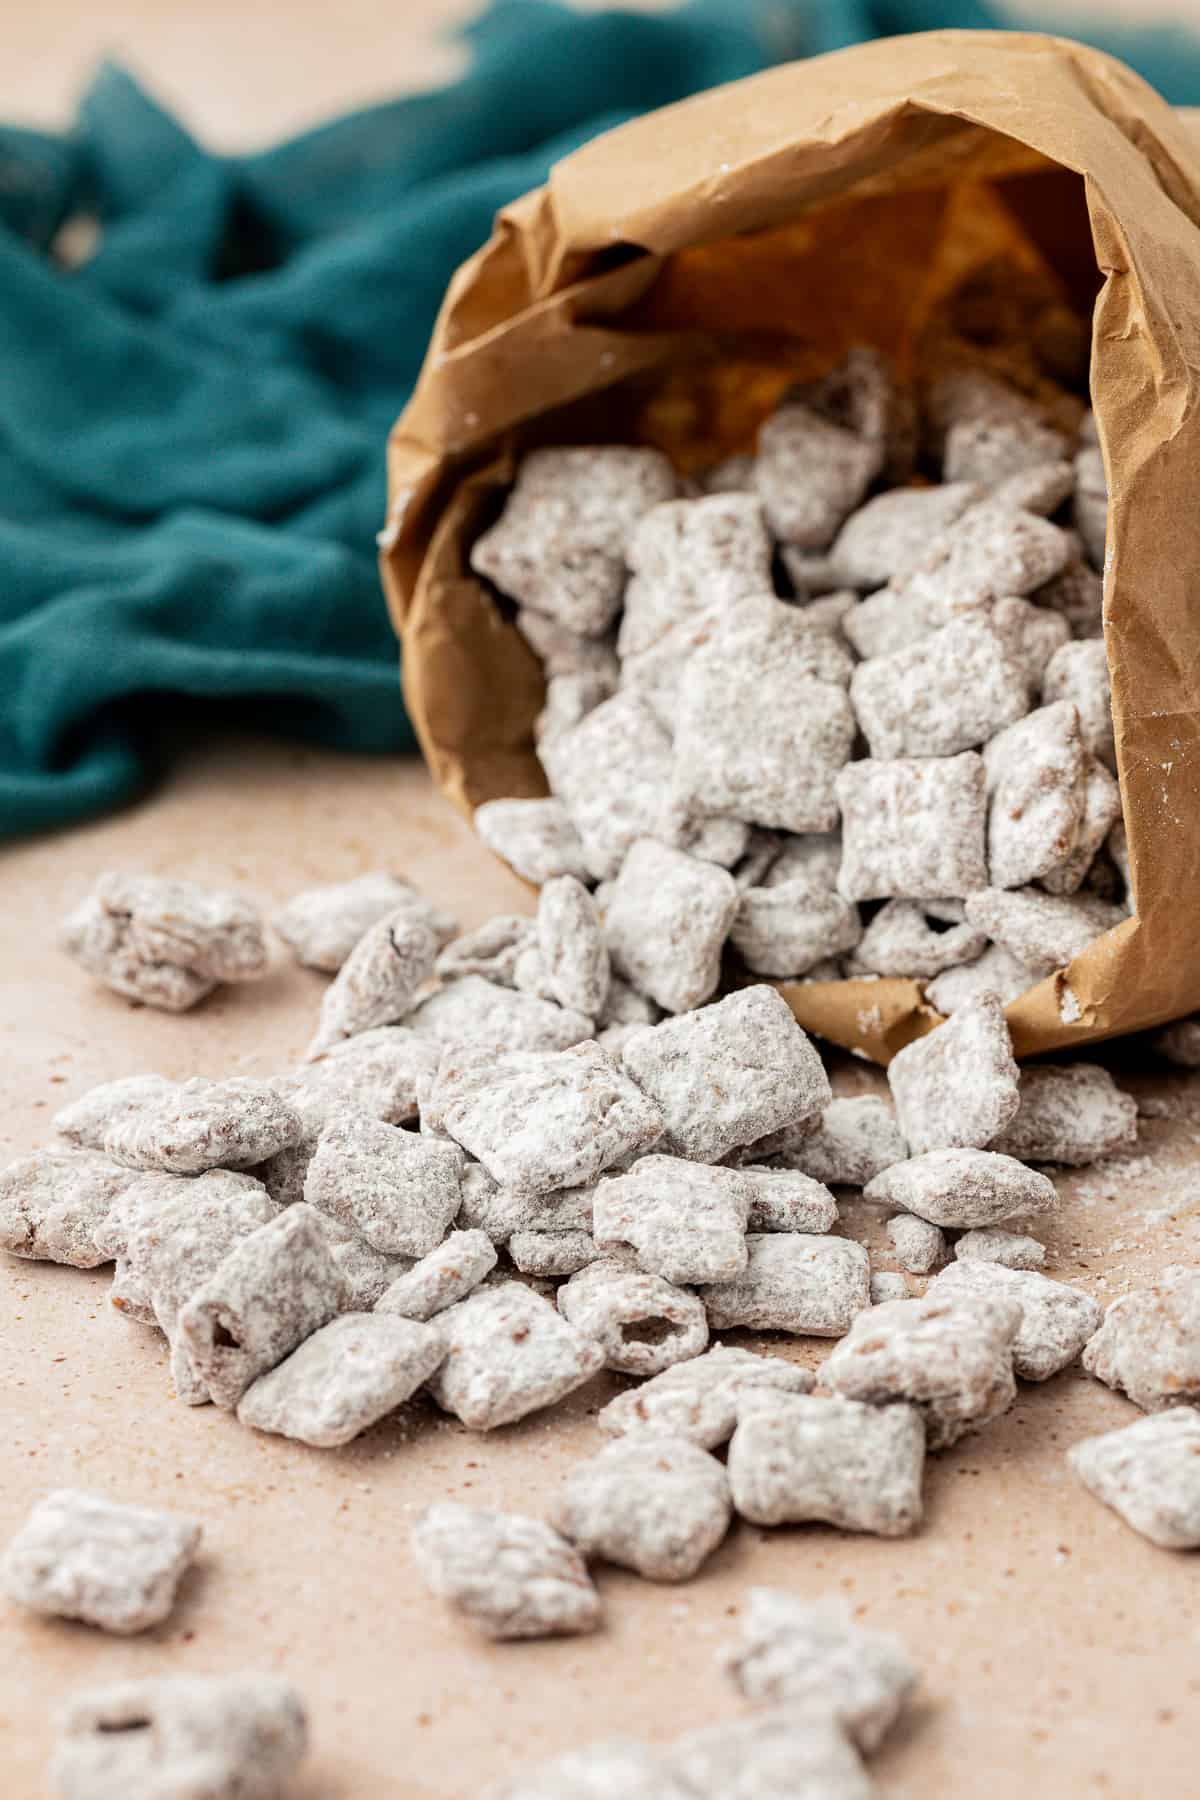 a brown bag of puppy chow laying on its side with puppy chow spilled out onto a countertop surface with a dark teal towel beside it